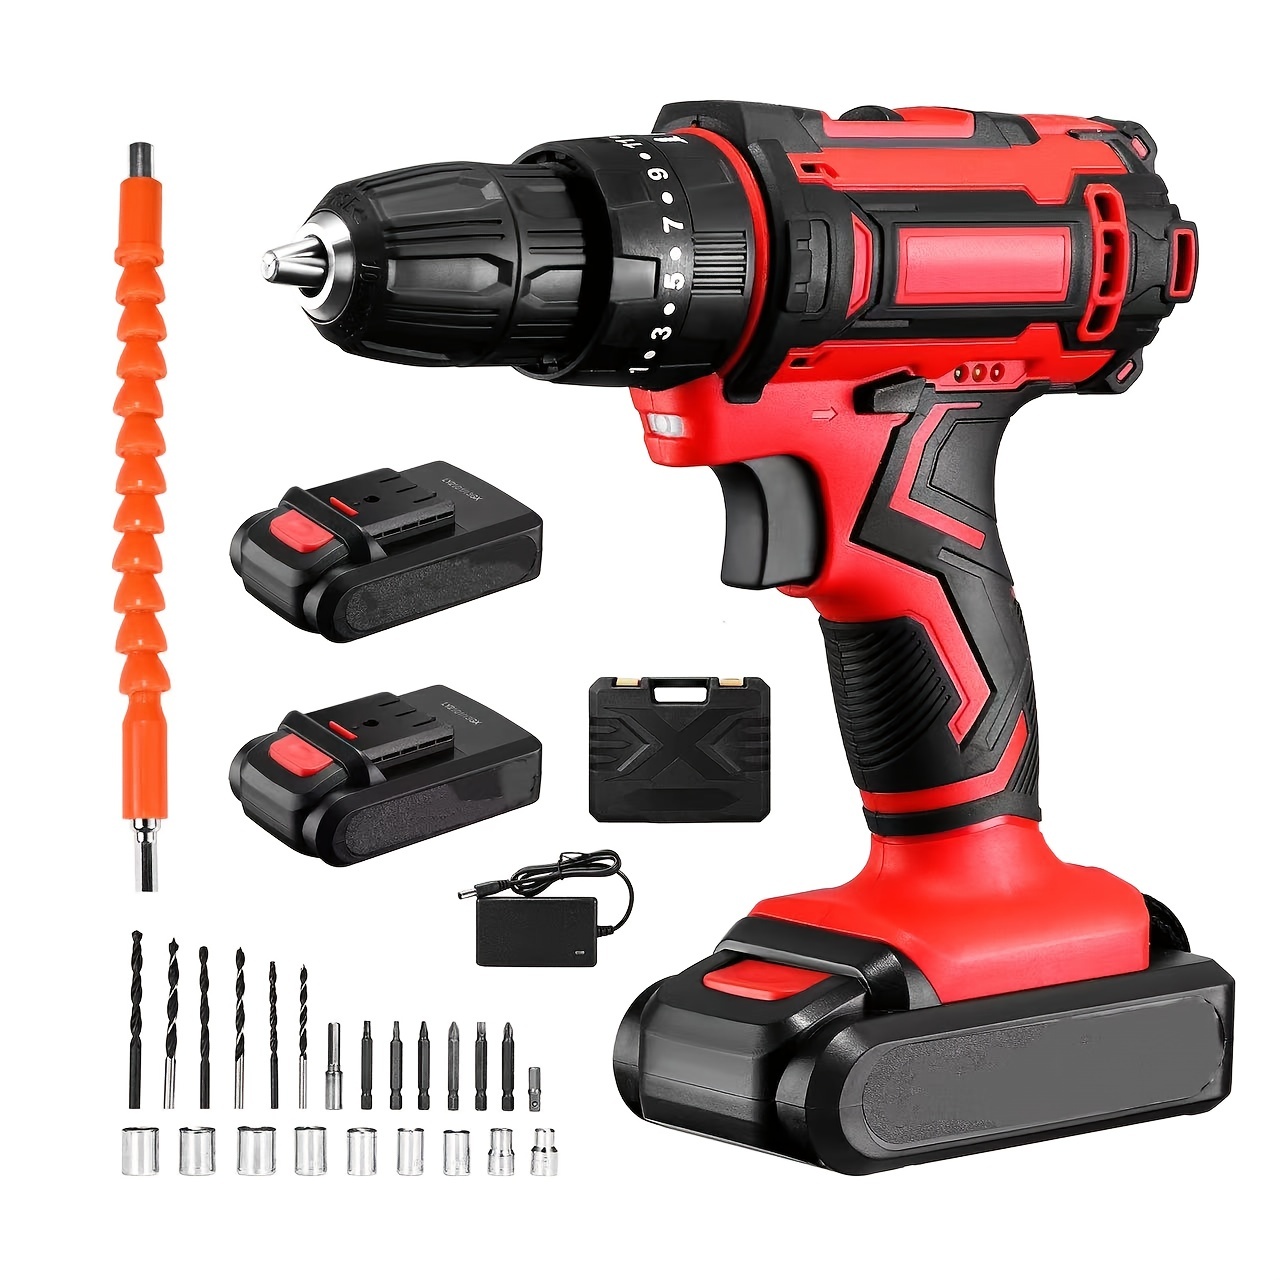 13 In 1 Electric Screwdriver Drill Kit Mini Multifunction Cordless  Rechargeable Power Tool With Drill